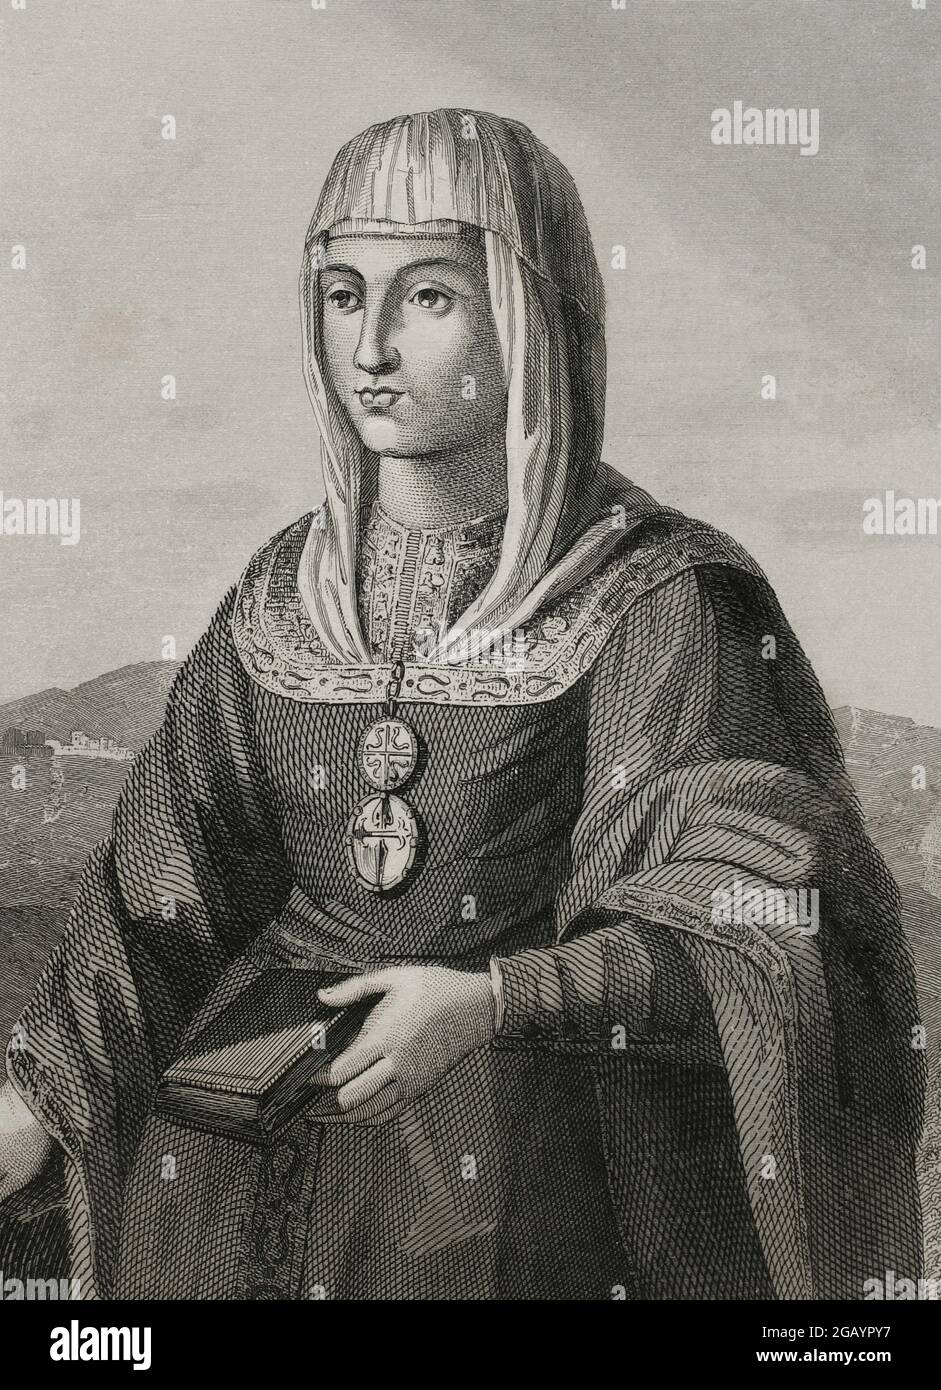 Joanna of Castile (known as Joanna the Mad) (1479-1555). Queen of Castile (1504-1555) and Aragon (from 1516), daughter of the Catholic Monarchs. Wife of Philip the Handsome. Portrait. Engraving by Antonio Roca Sallent. Las Glorias Nacionales, 1853. Author: Antonio Roca Sallent (1813-1864). Spanish engraver. Stock Photo